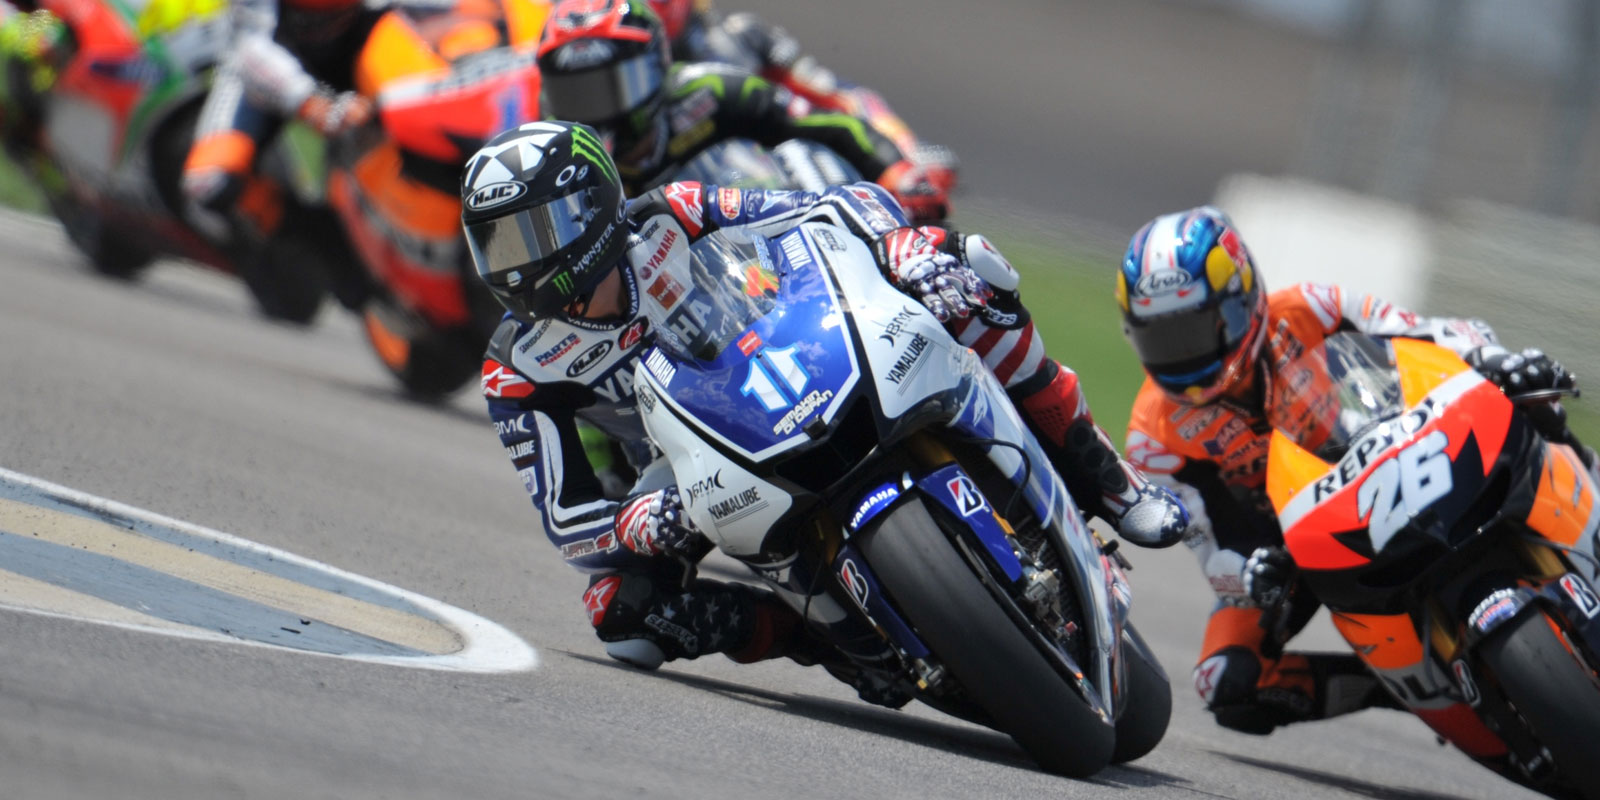   MotoGP on OneHD and Fox Sports  image - aqueduct.co.uk 